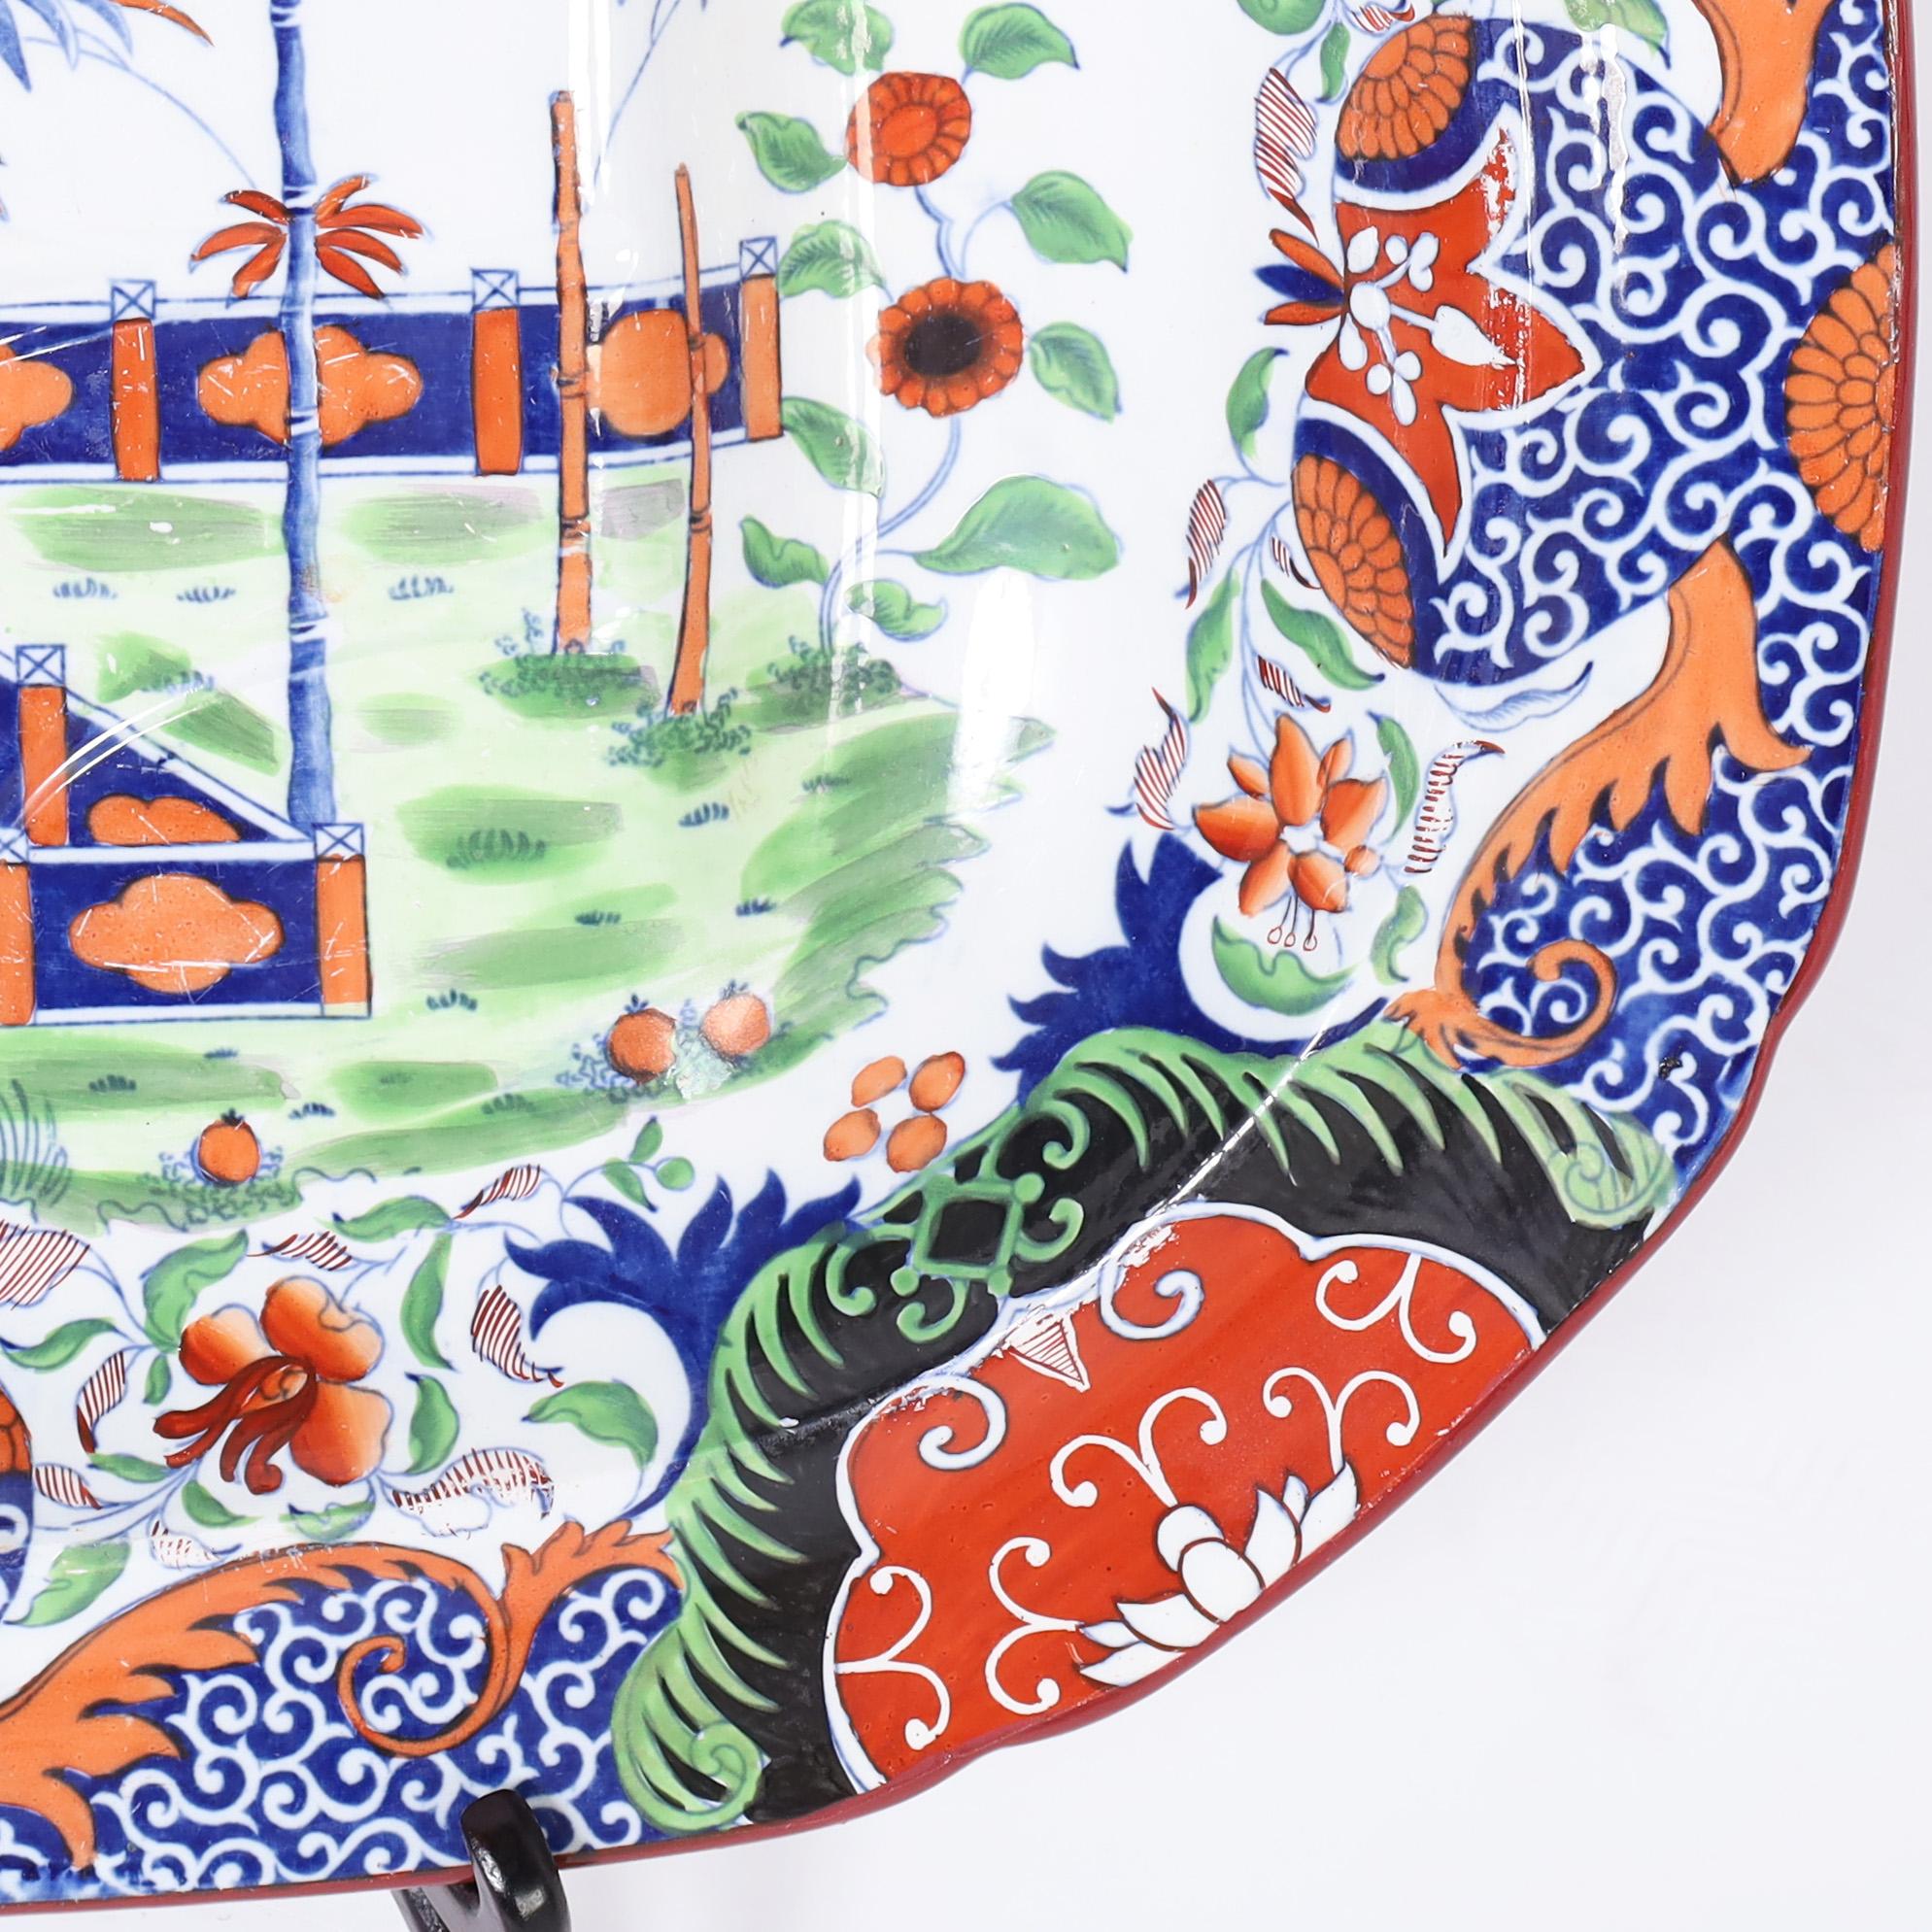 Victorian Antique English Ironstone Chinoiserie Platter For Sale